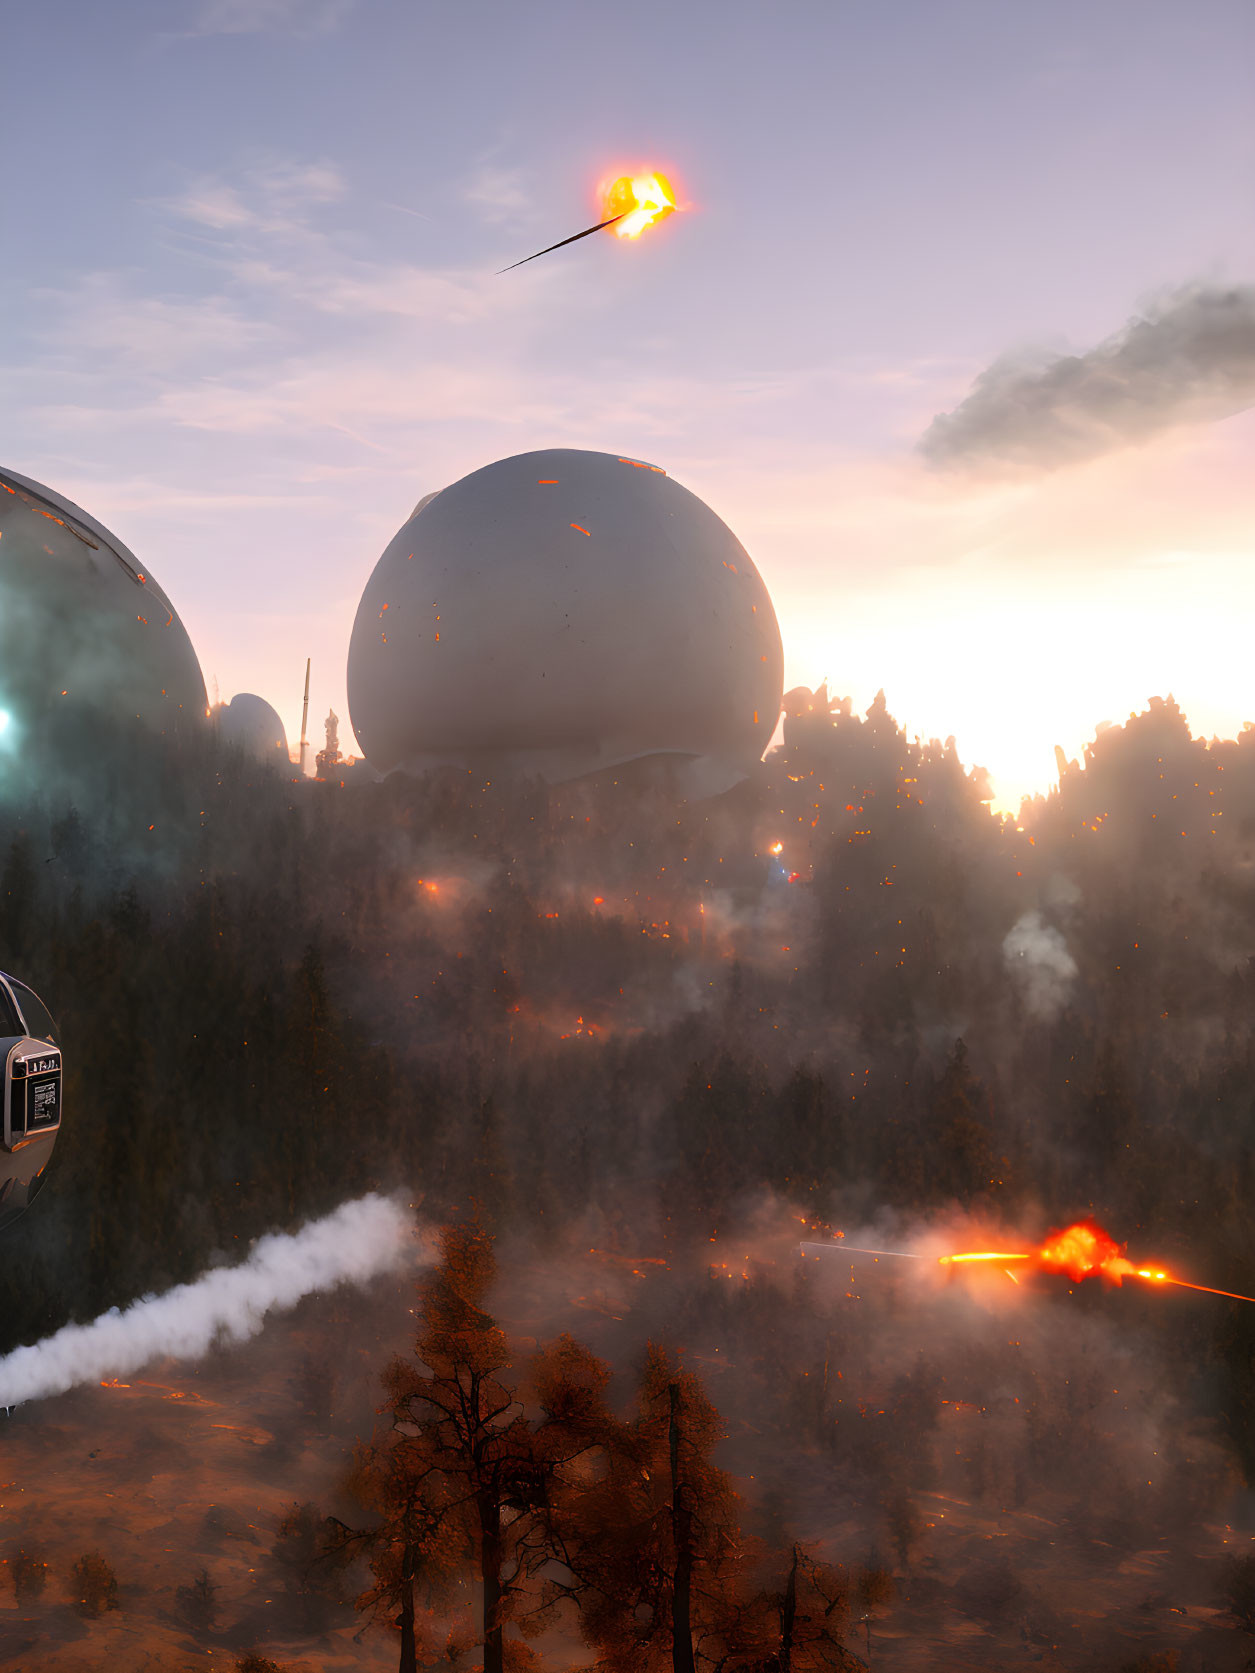 Futuristic domes in burning forest with descending fiery objects